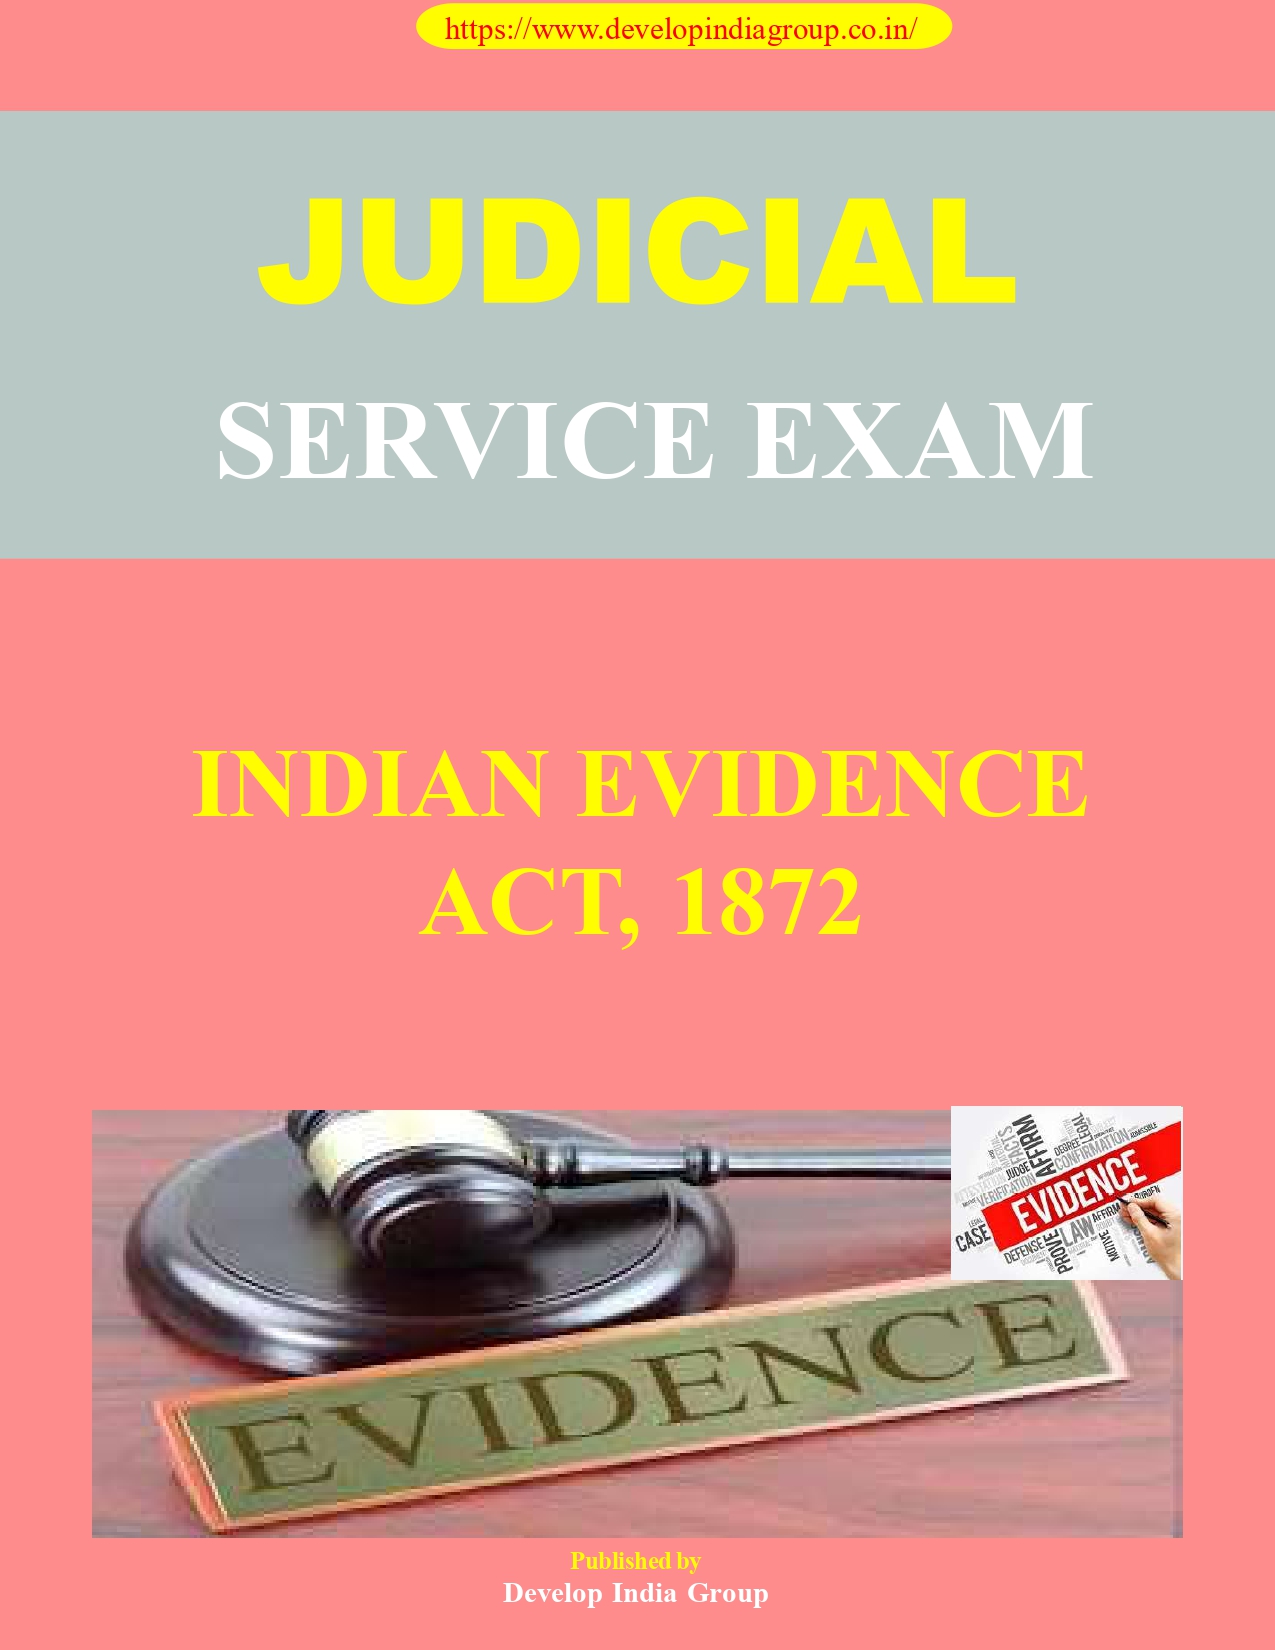 Evidence-act-sample